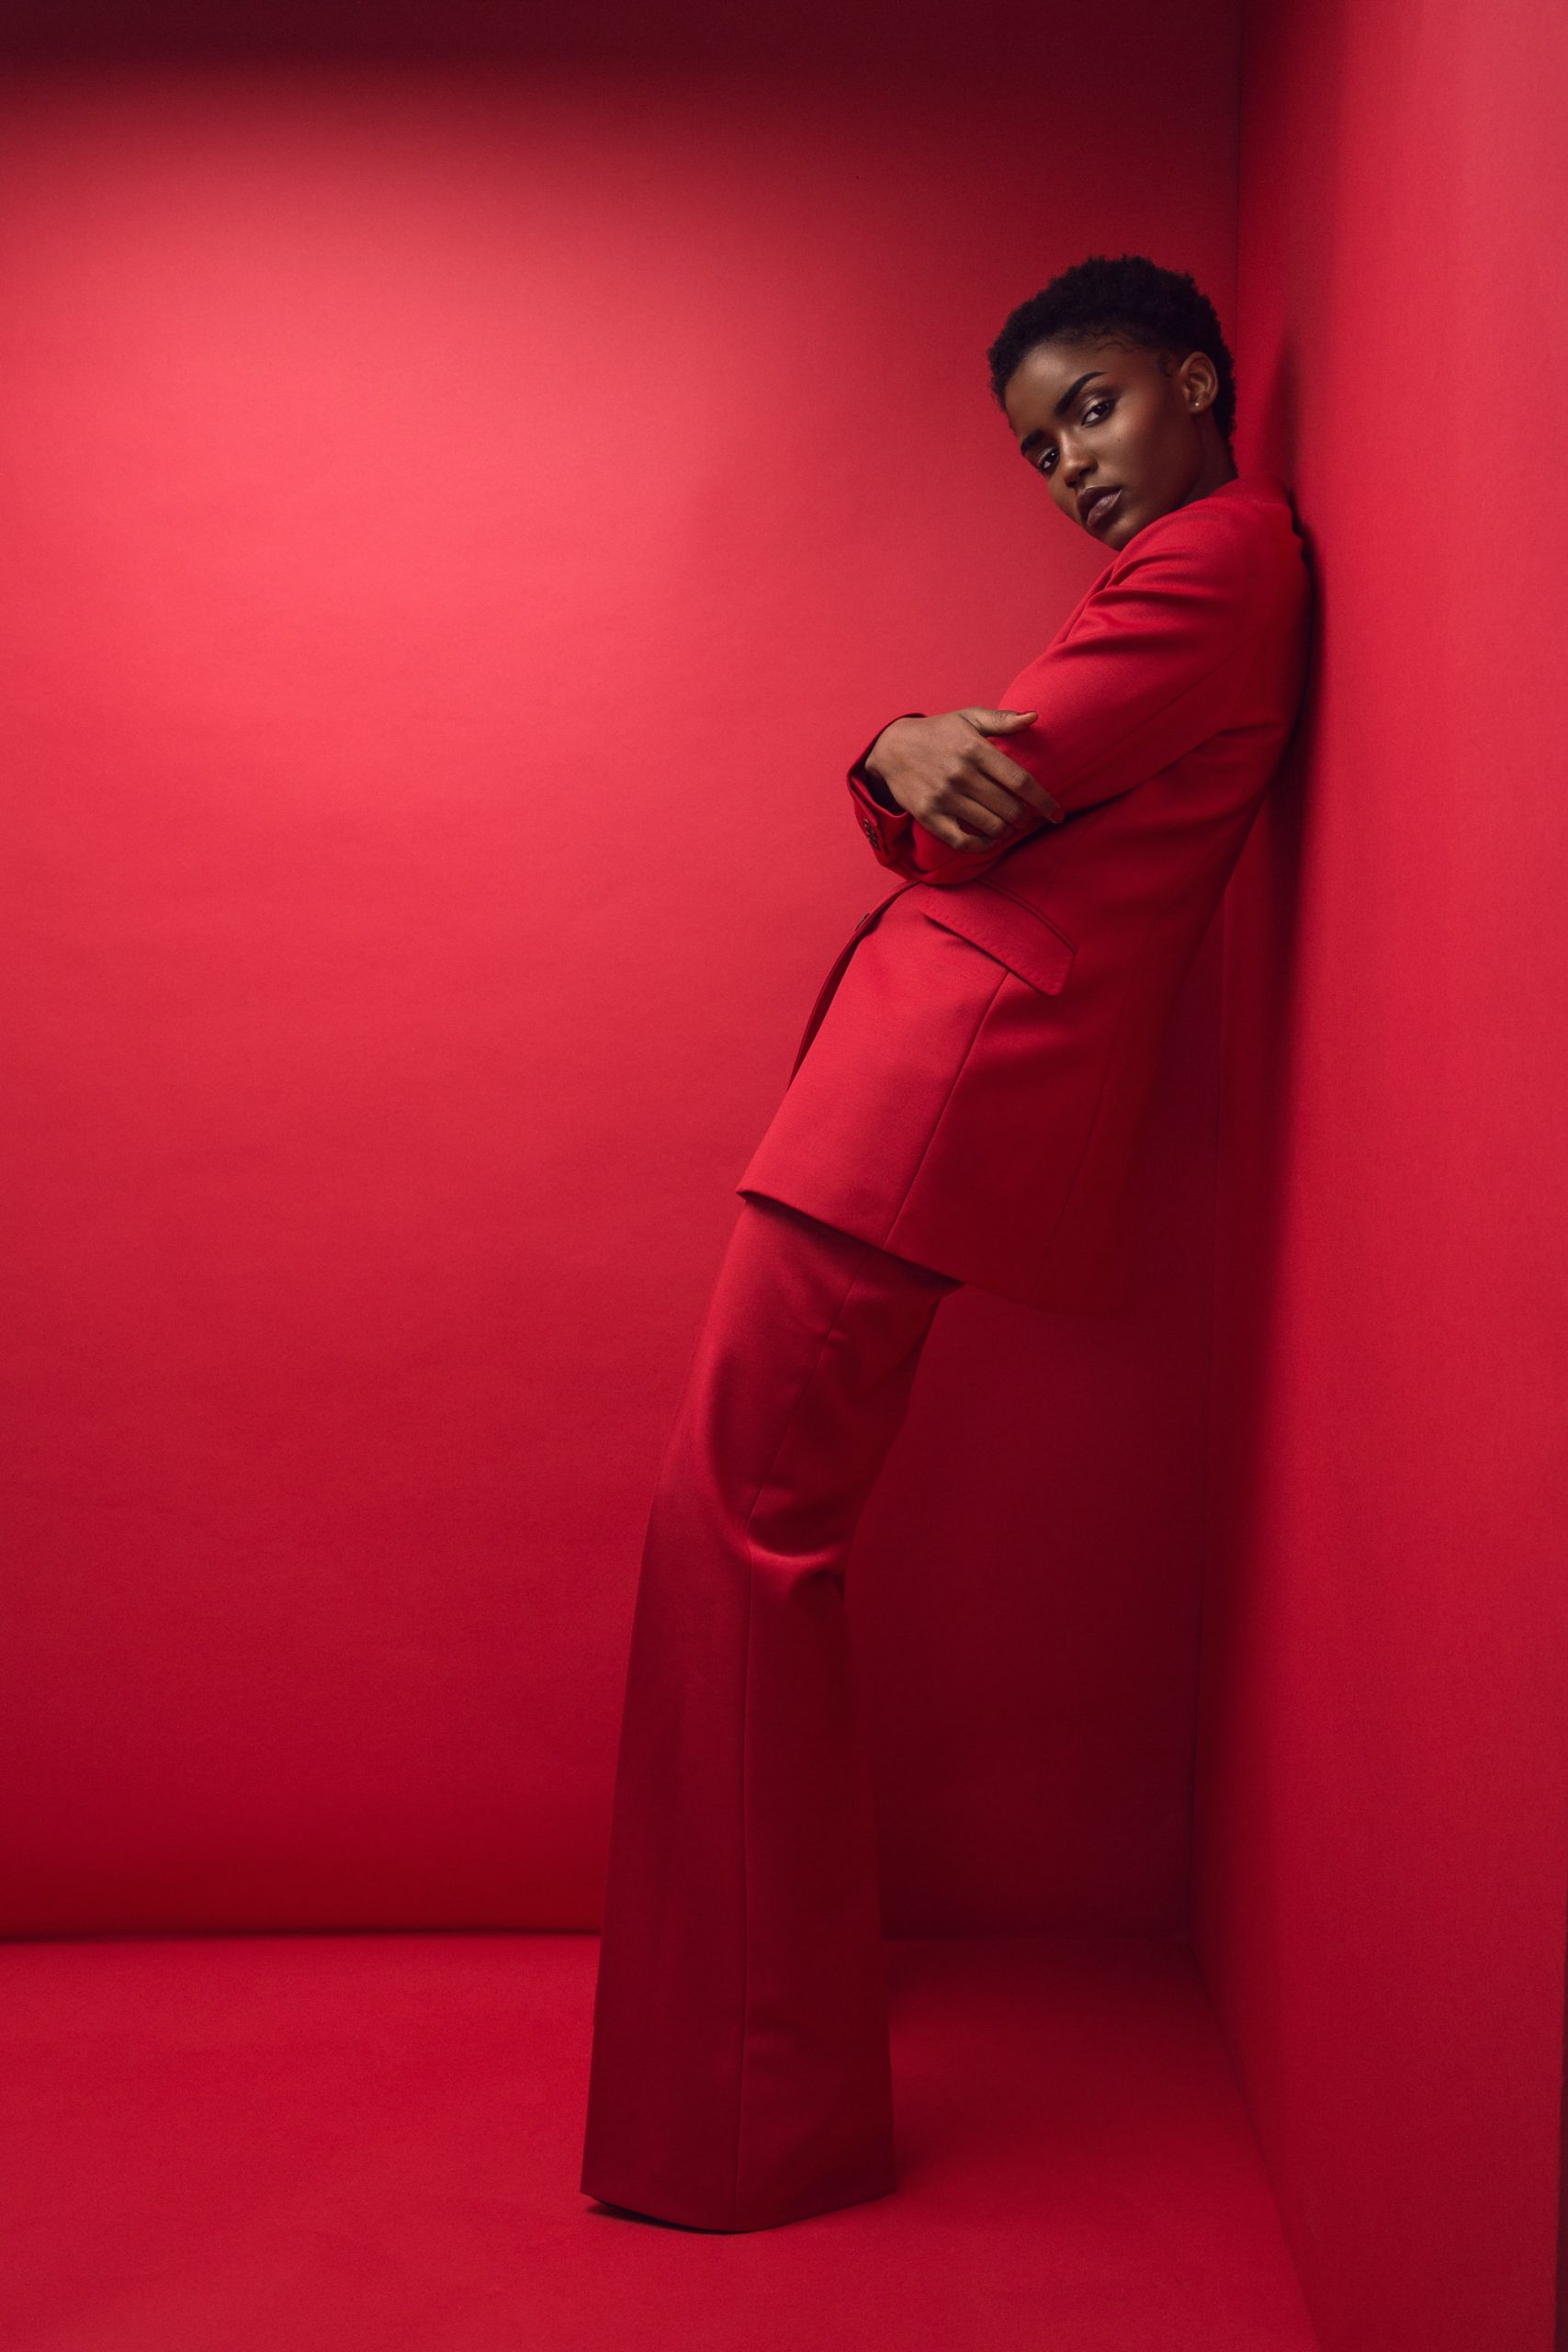 The Red Room Editorial-3033